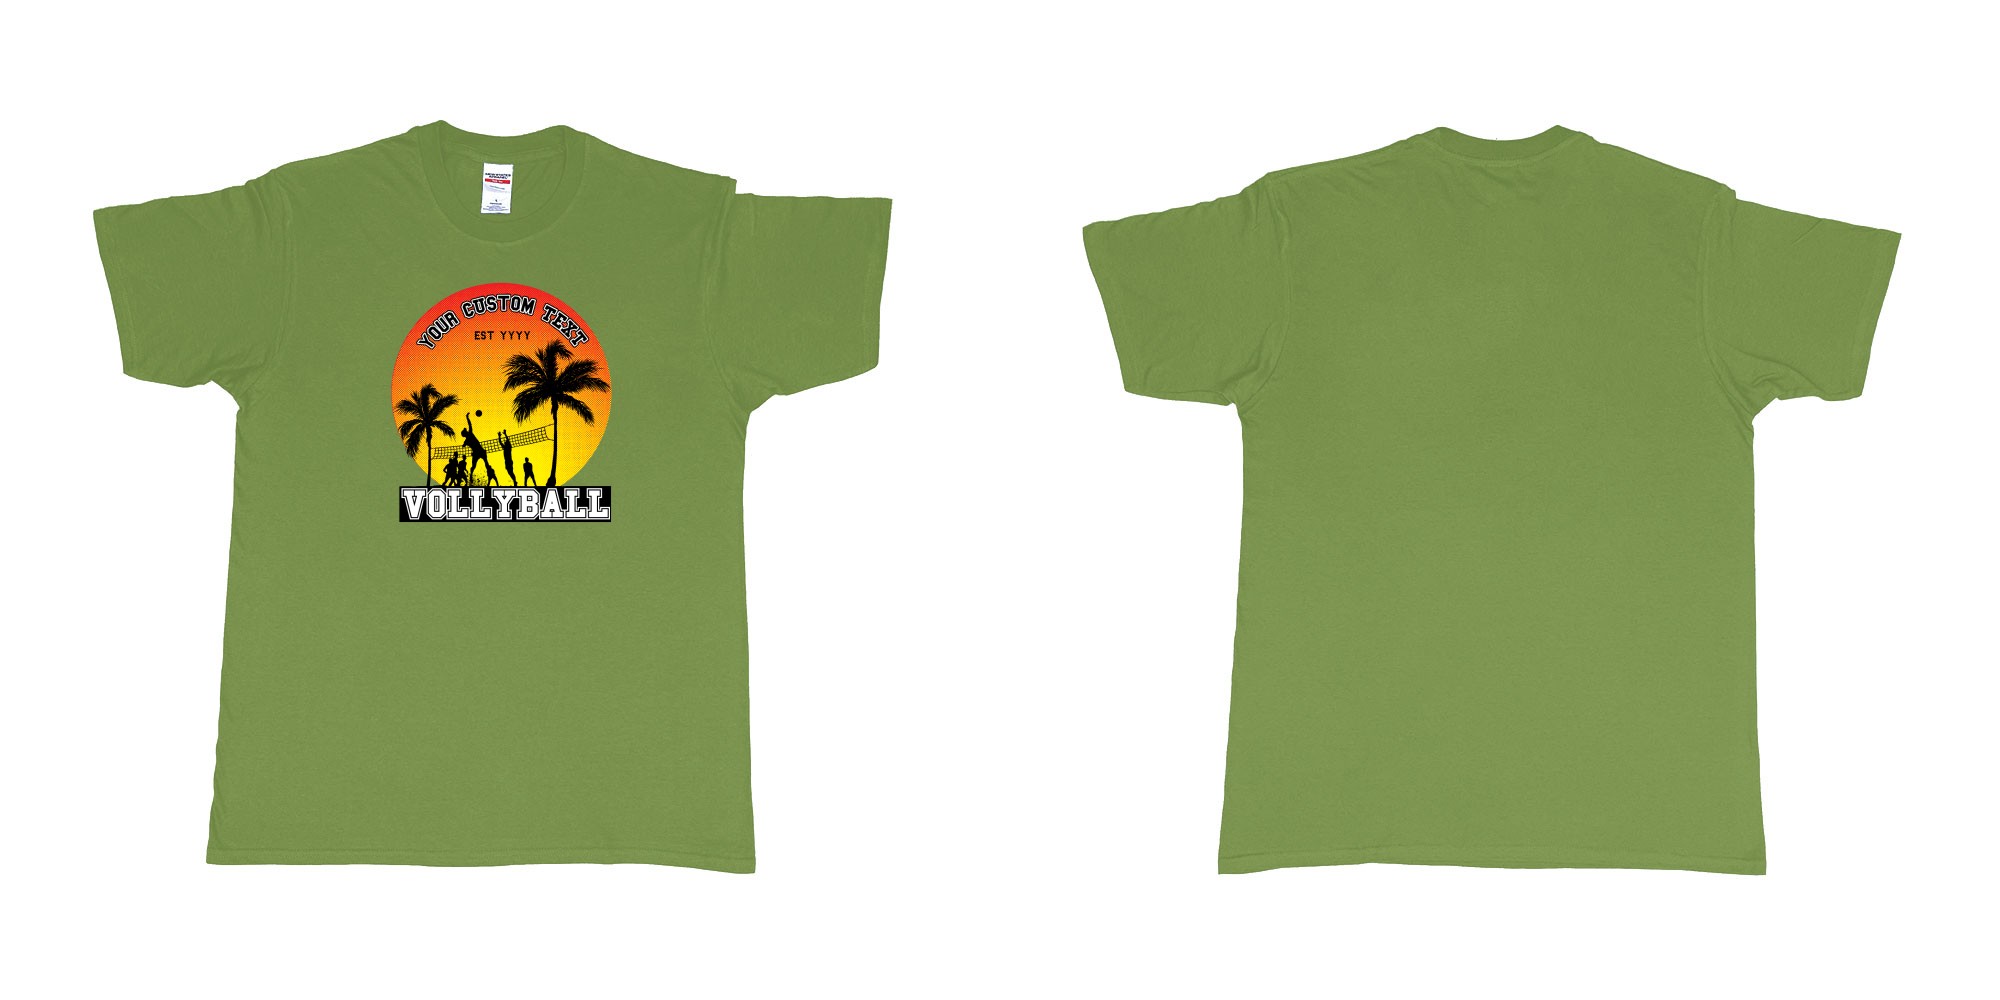 Custom tshirt design sunset volleyball t shirt with a sunset view and your custom print text and year in fabric color military-green choice your own text made in Bali by The Pirate Way